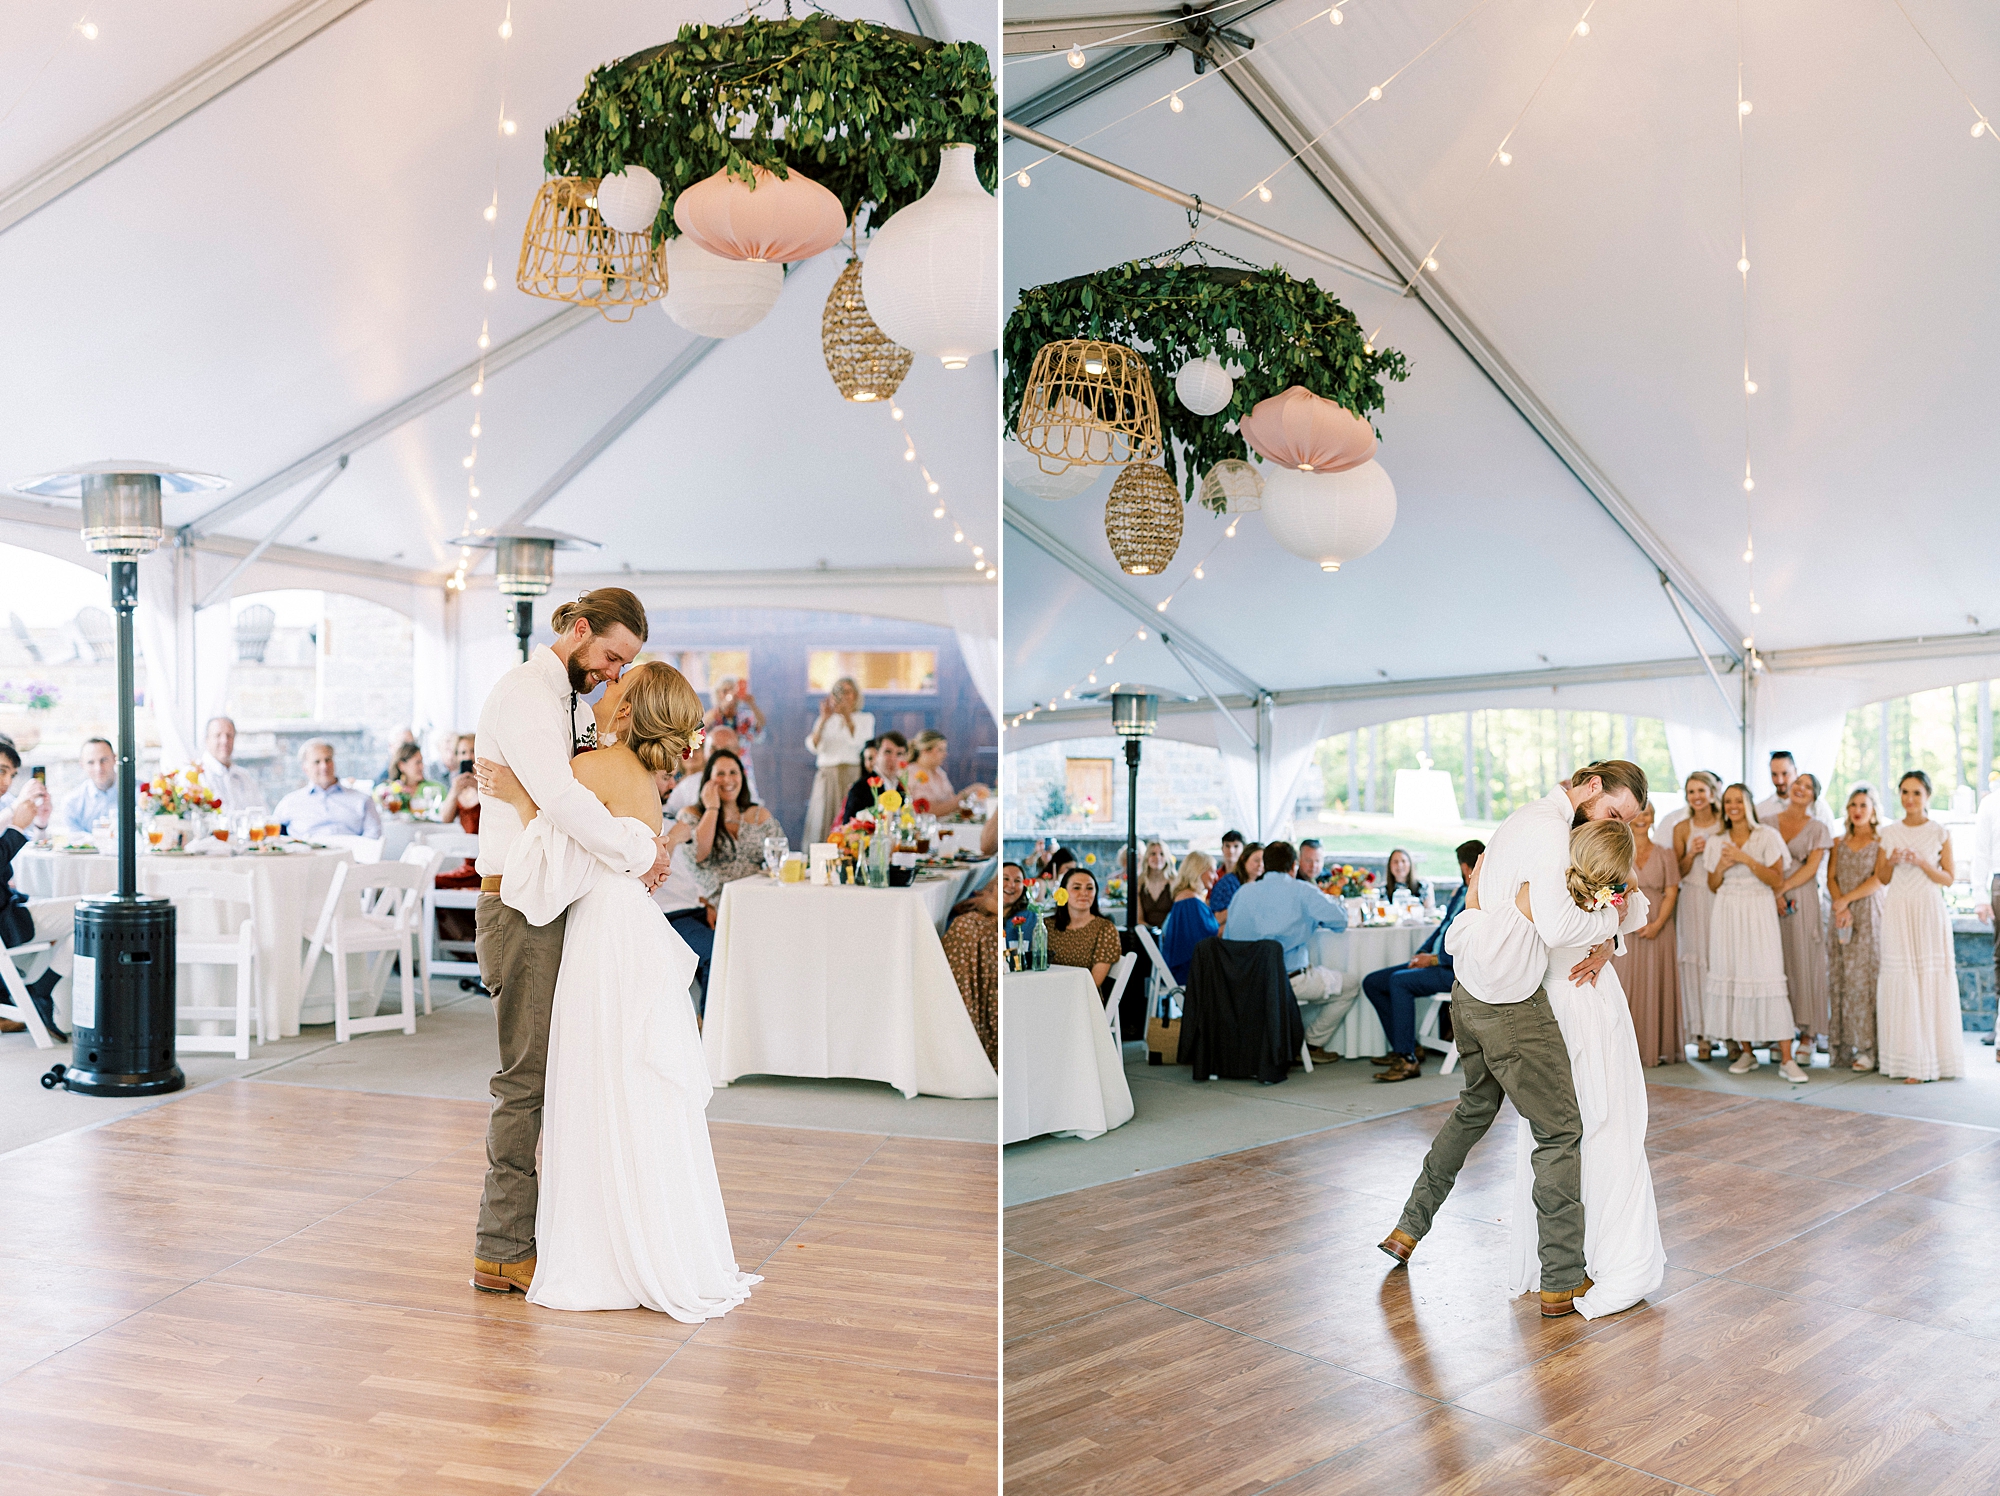 newlyweds' first dance during wedding reception on lawn in Richfield NC